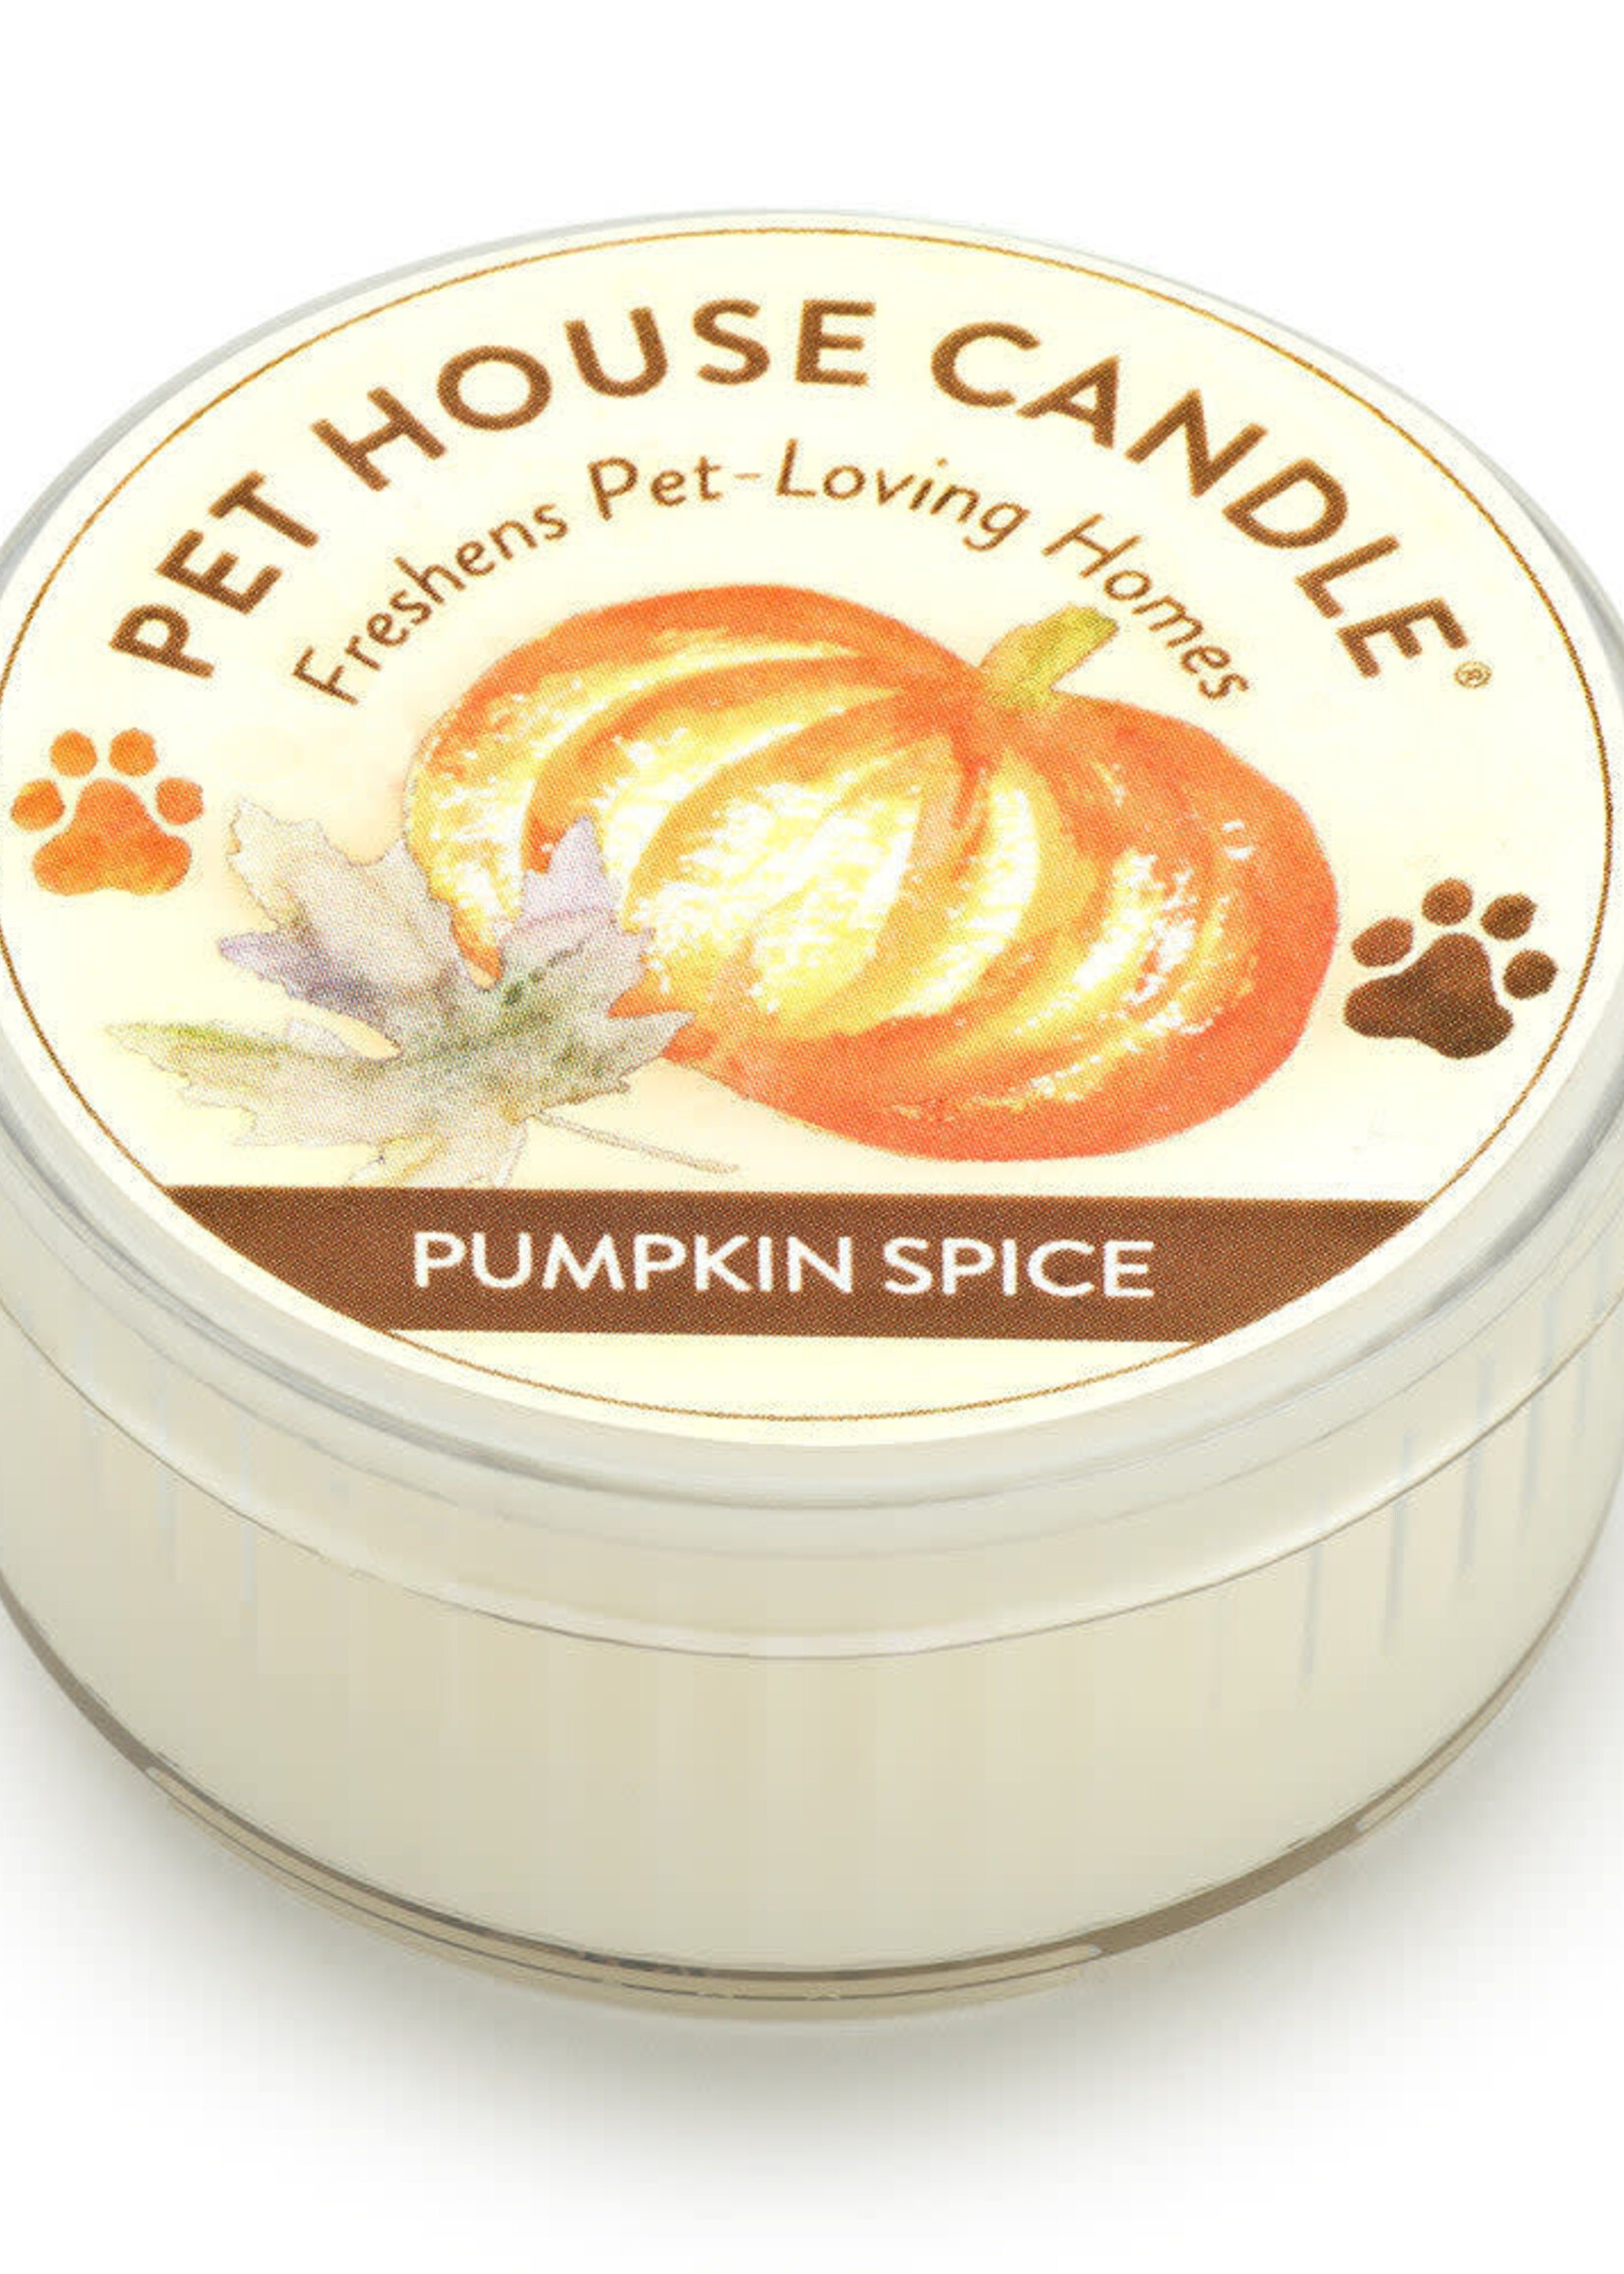 Pet House by One Fur All Pumpkin Spice Mini Candle 1.5 oz